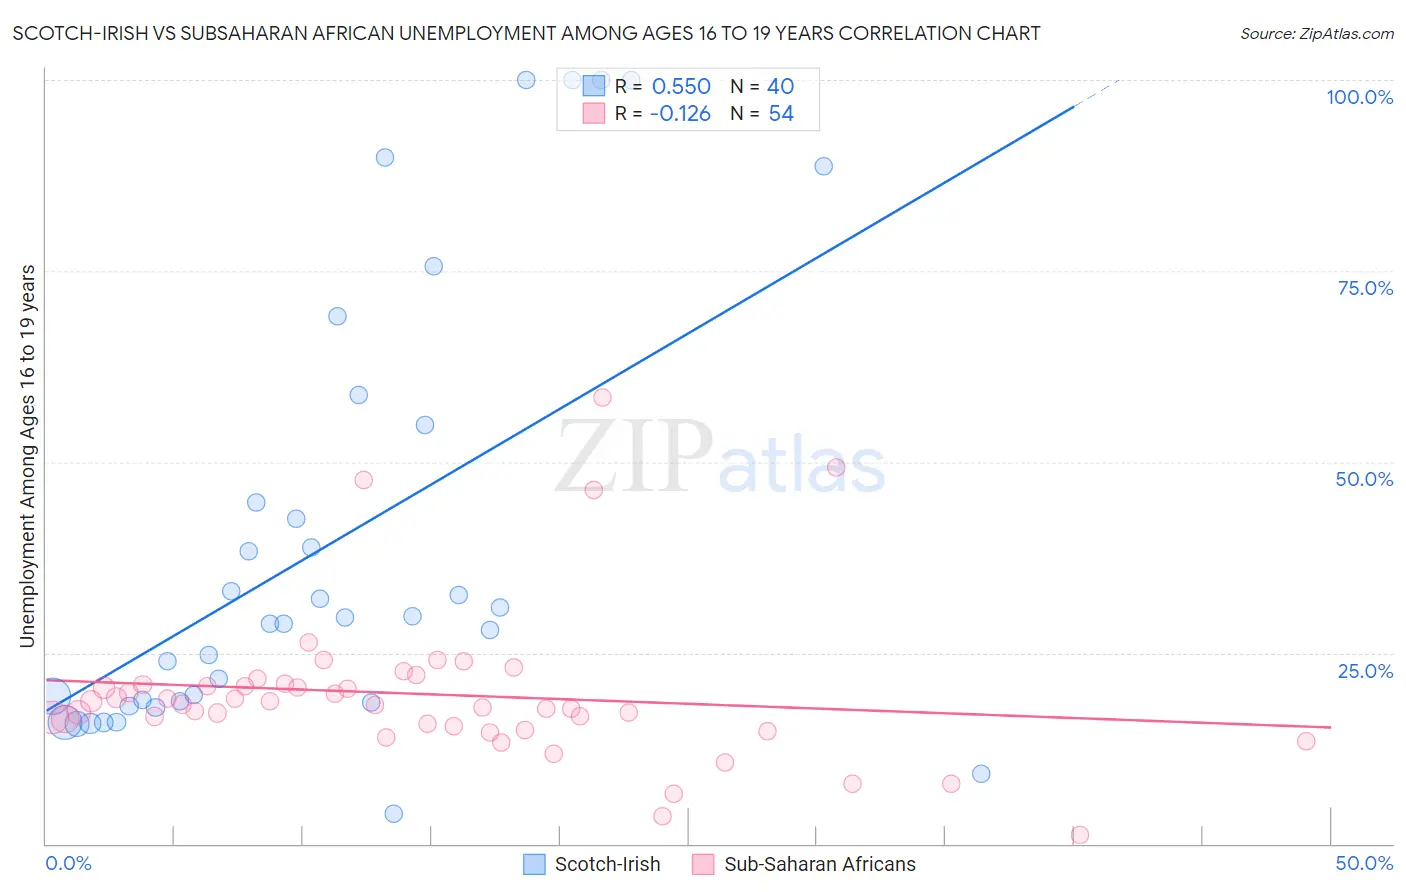 Scotch-Irish vs Subsaharan African Unemployment Among Ages 16 to 19 years